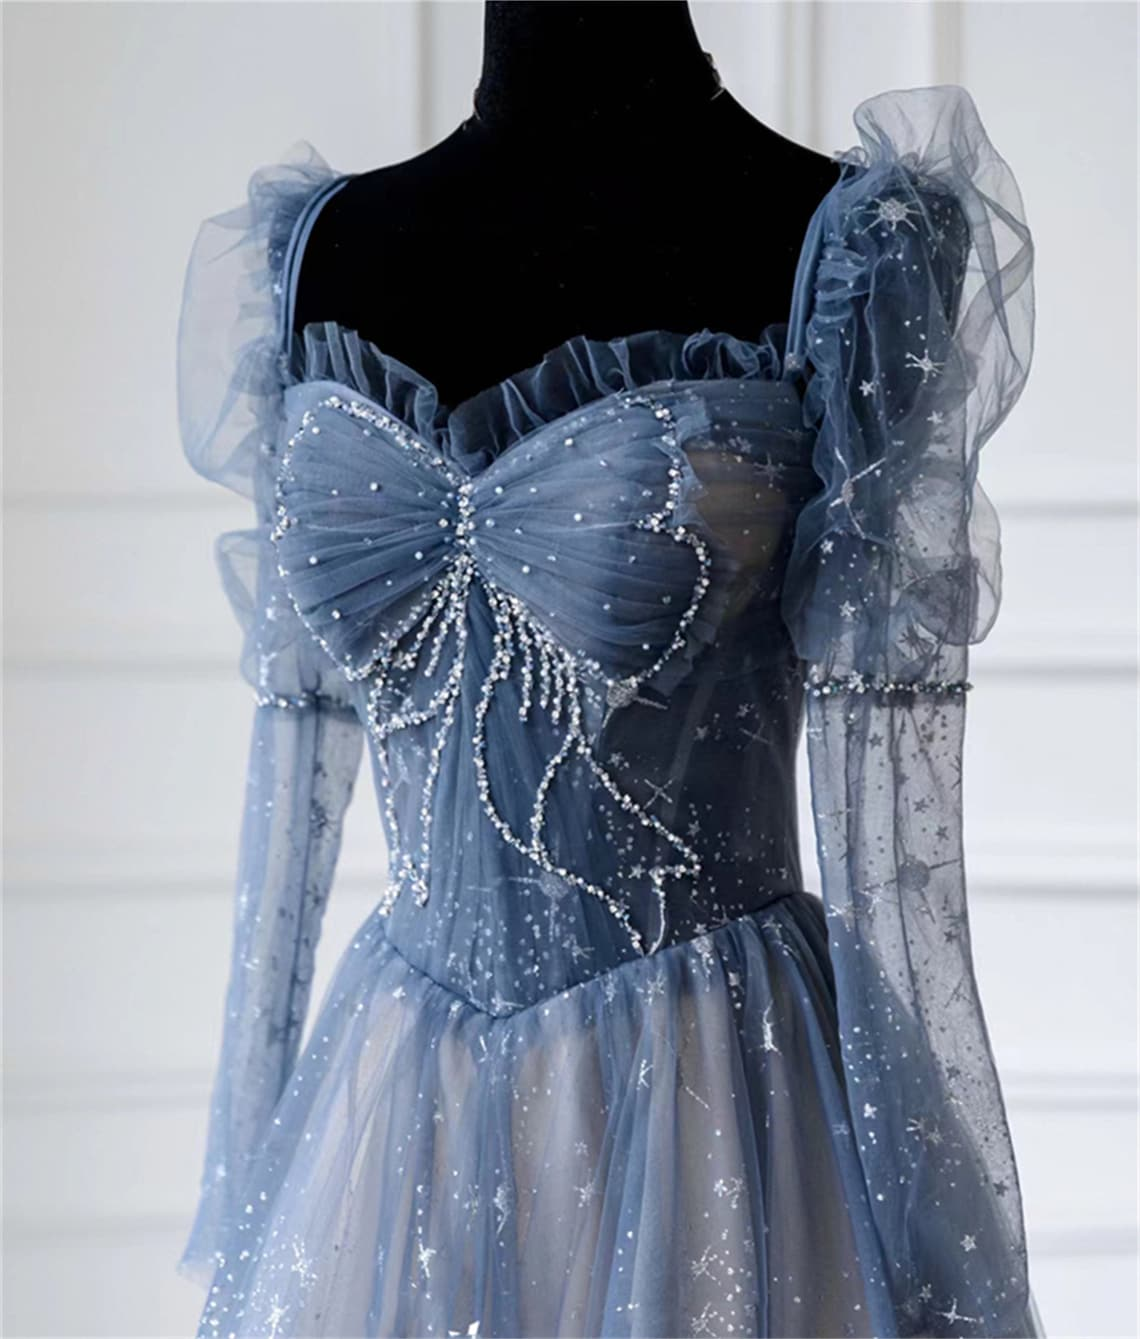 Blue Beaded Long Sleeves A-line Tulle Prom Dress, Blue Floor Length Party Dress